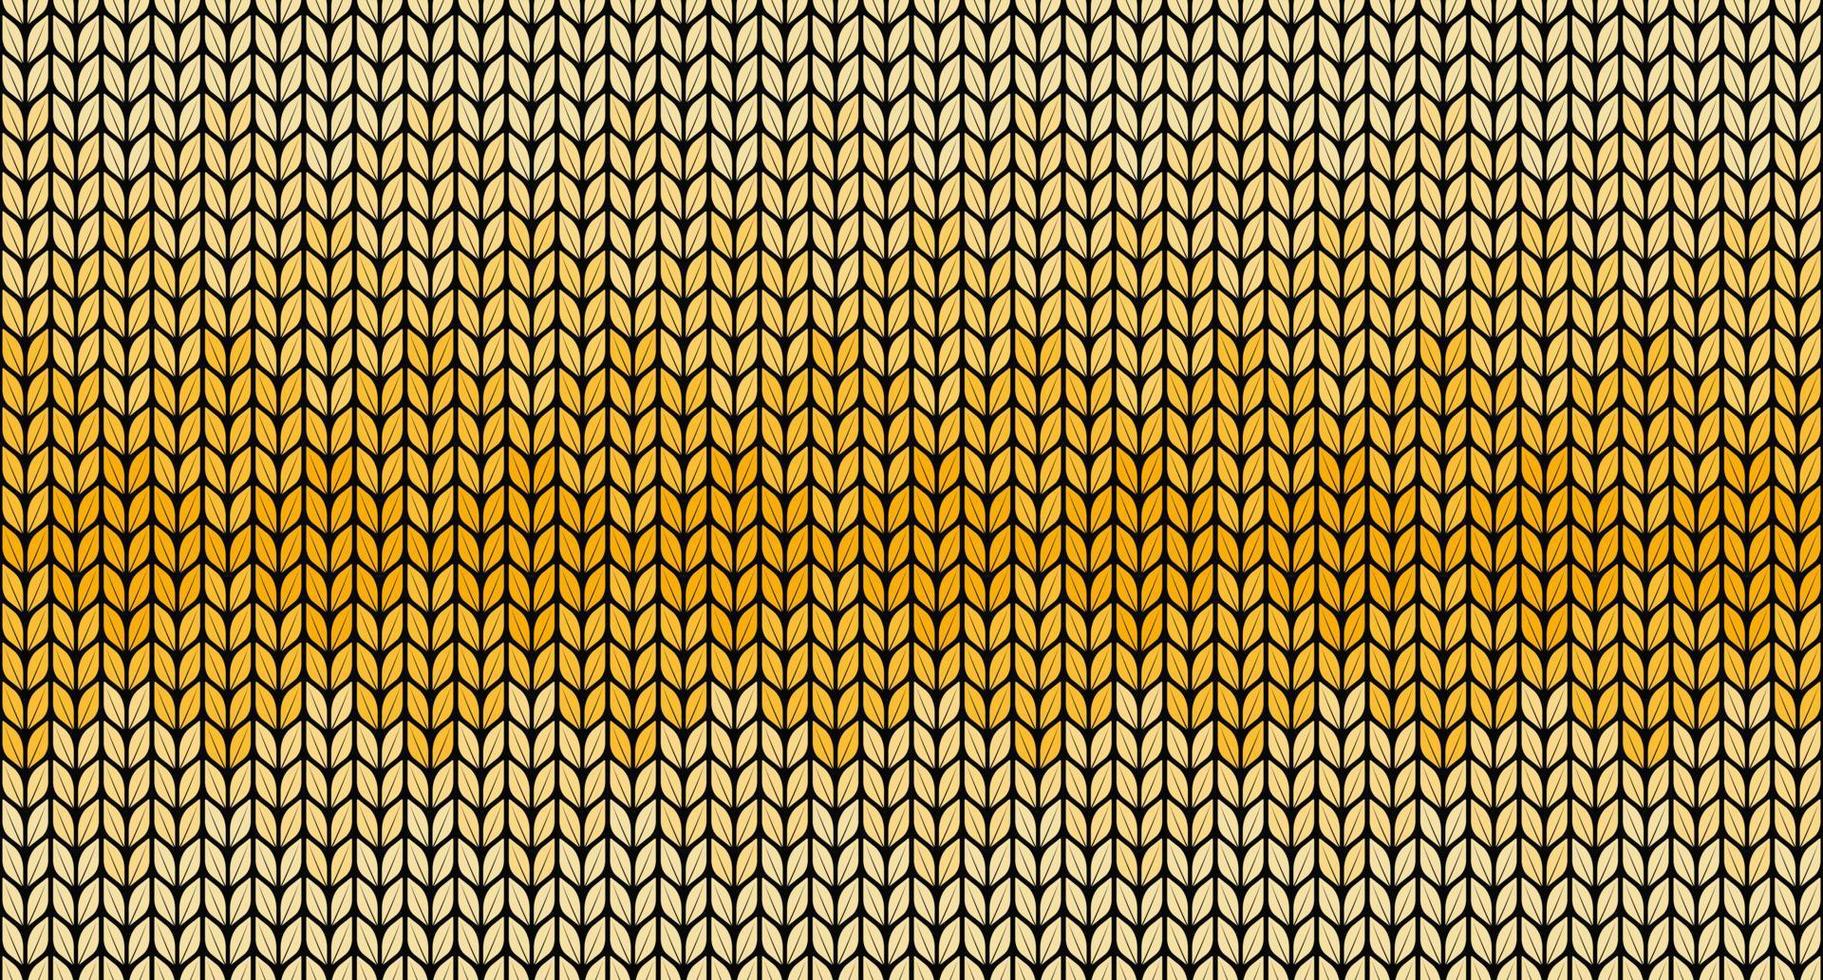 Knitted seamless pattern color golden. colorful knitted textures. Vector illustration.